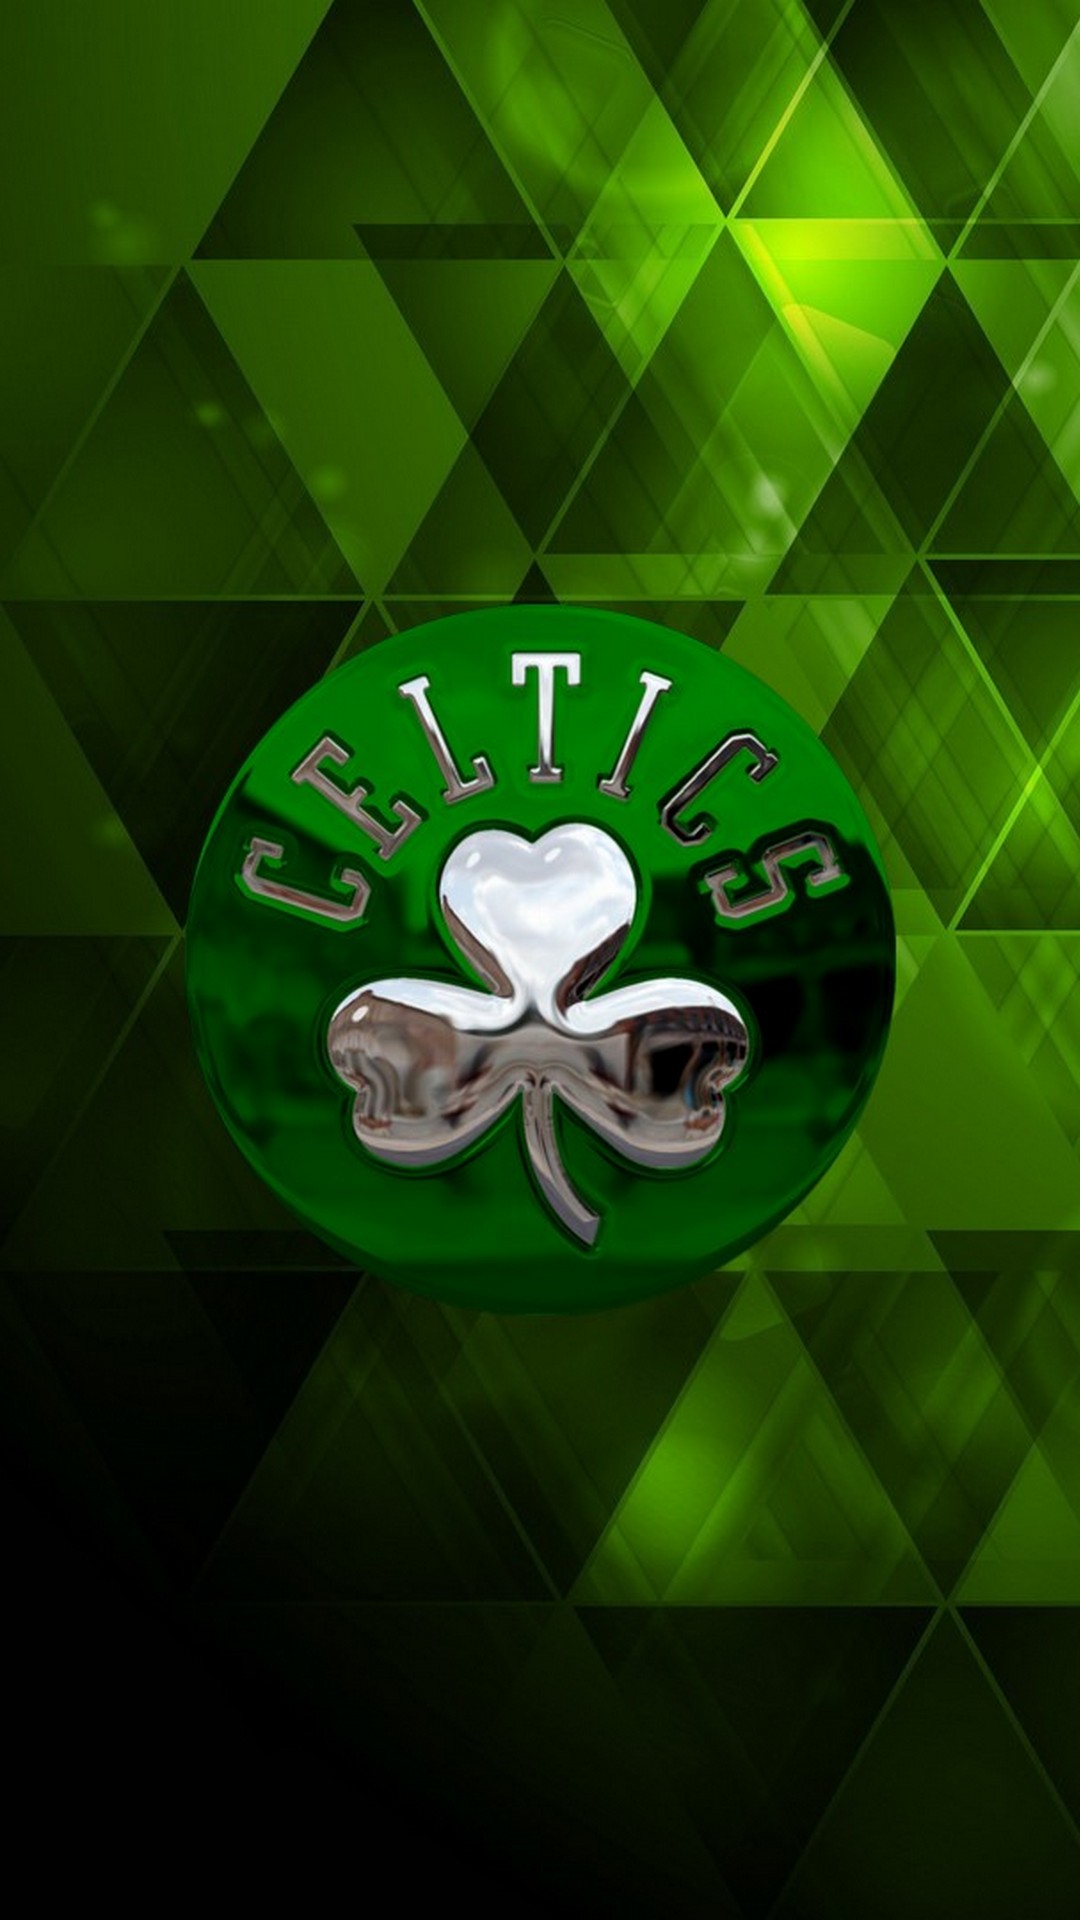 Boston Celtics Phone Backgrounds with image resolution 1080x1920 pixel. You can make this wallpaper for your Desktop Computer Backgrounds, Mac Wallpapers, Android Lock screen or iPhone Screensavers